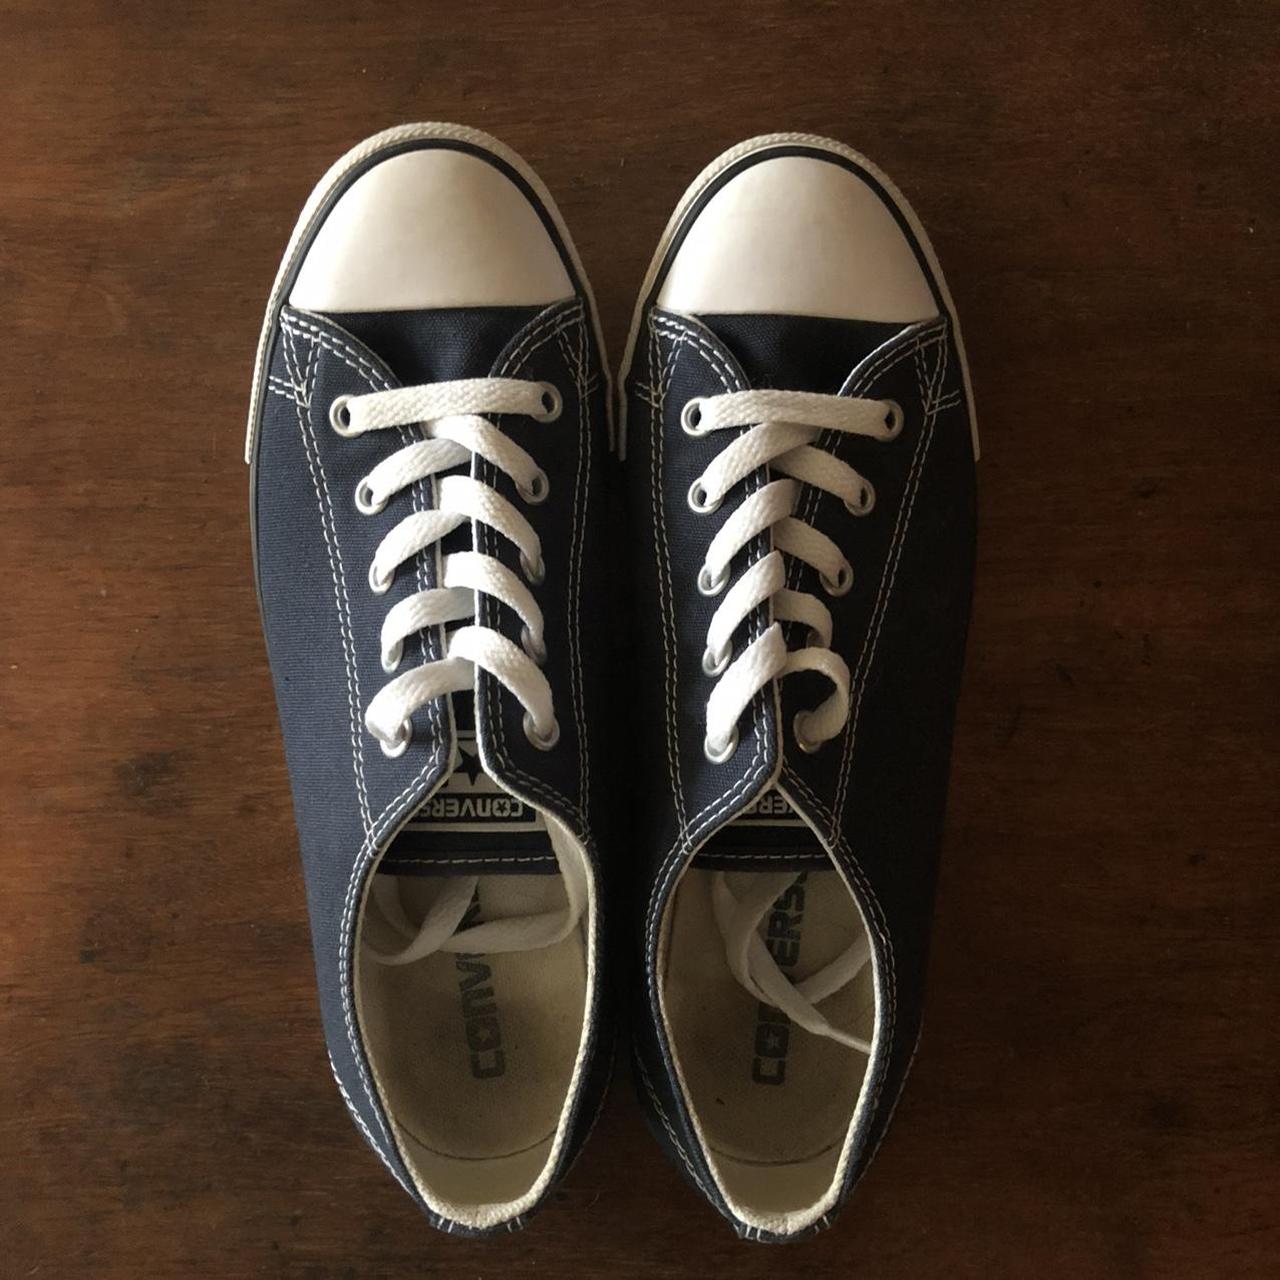 Converse Women's Navy and White Trainers | Depop